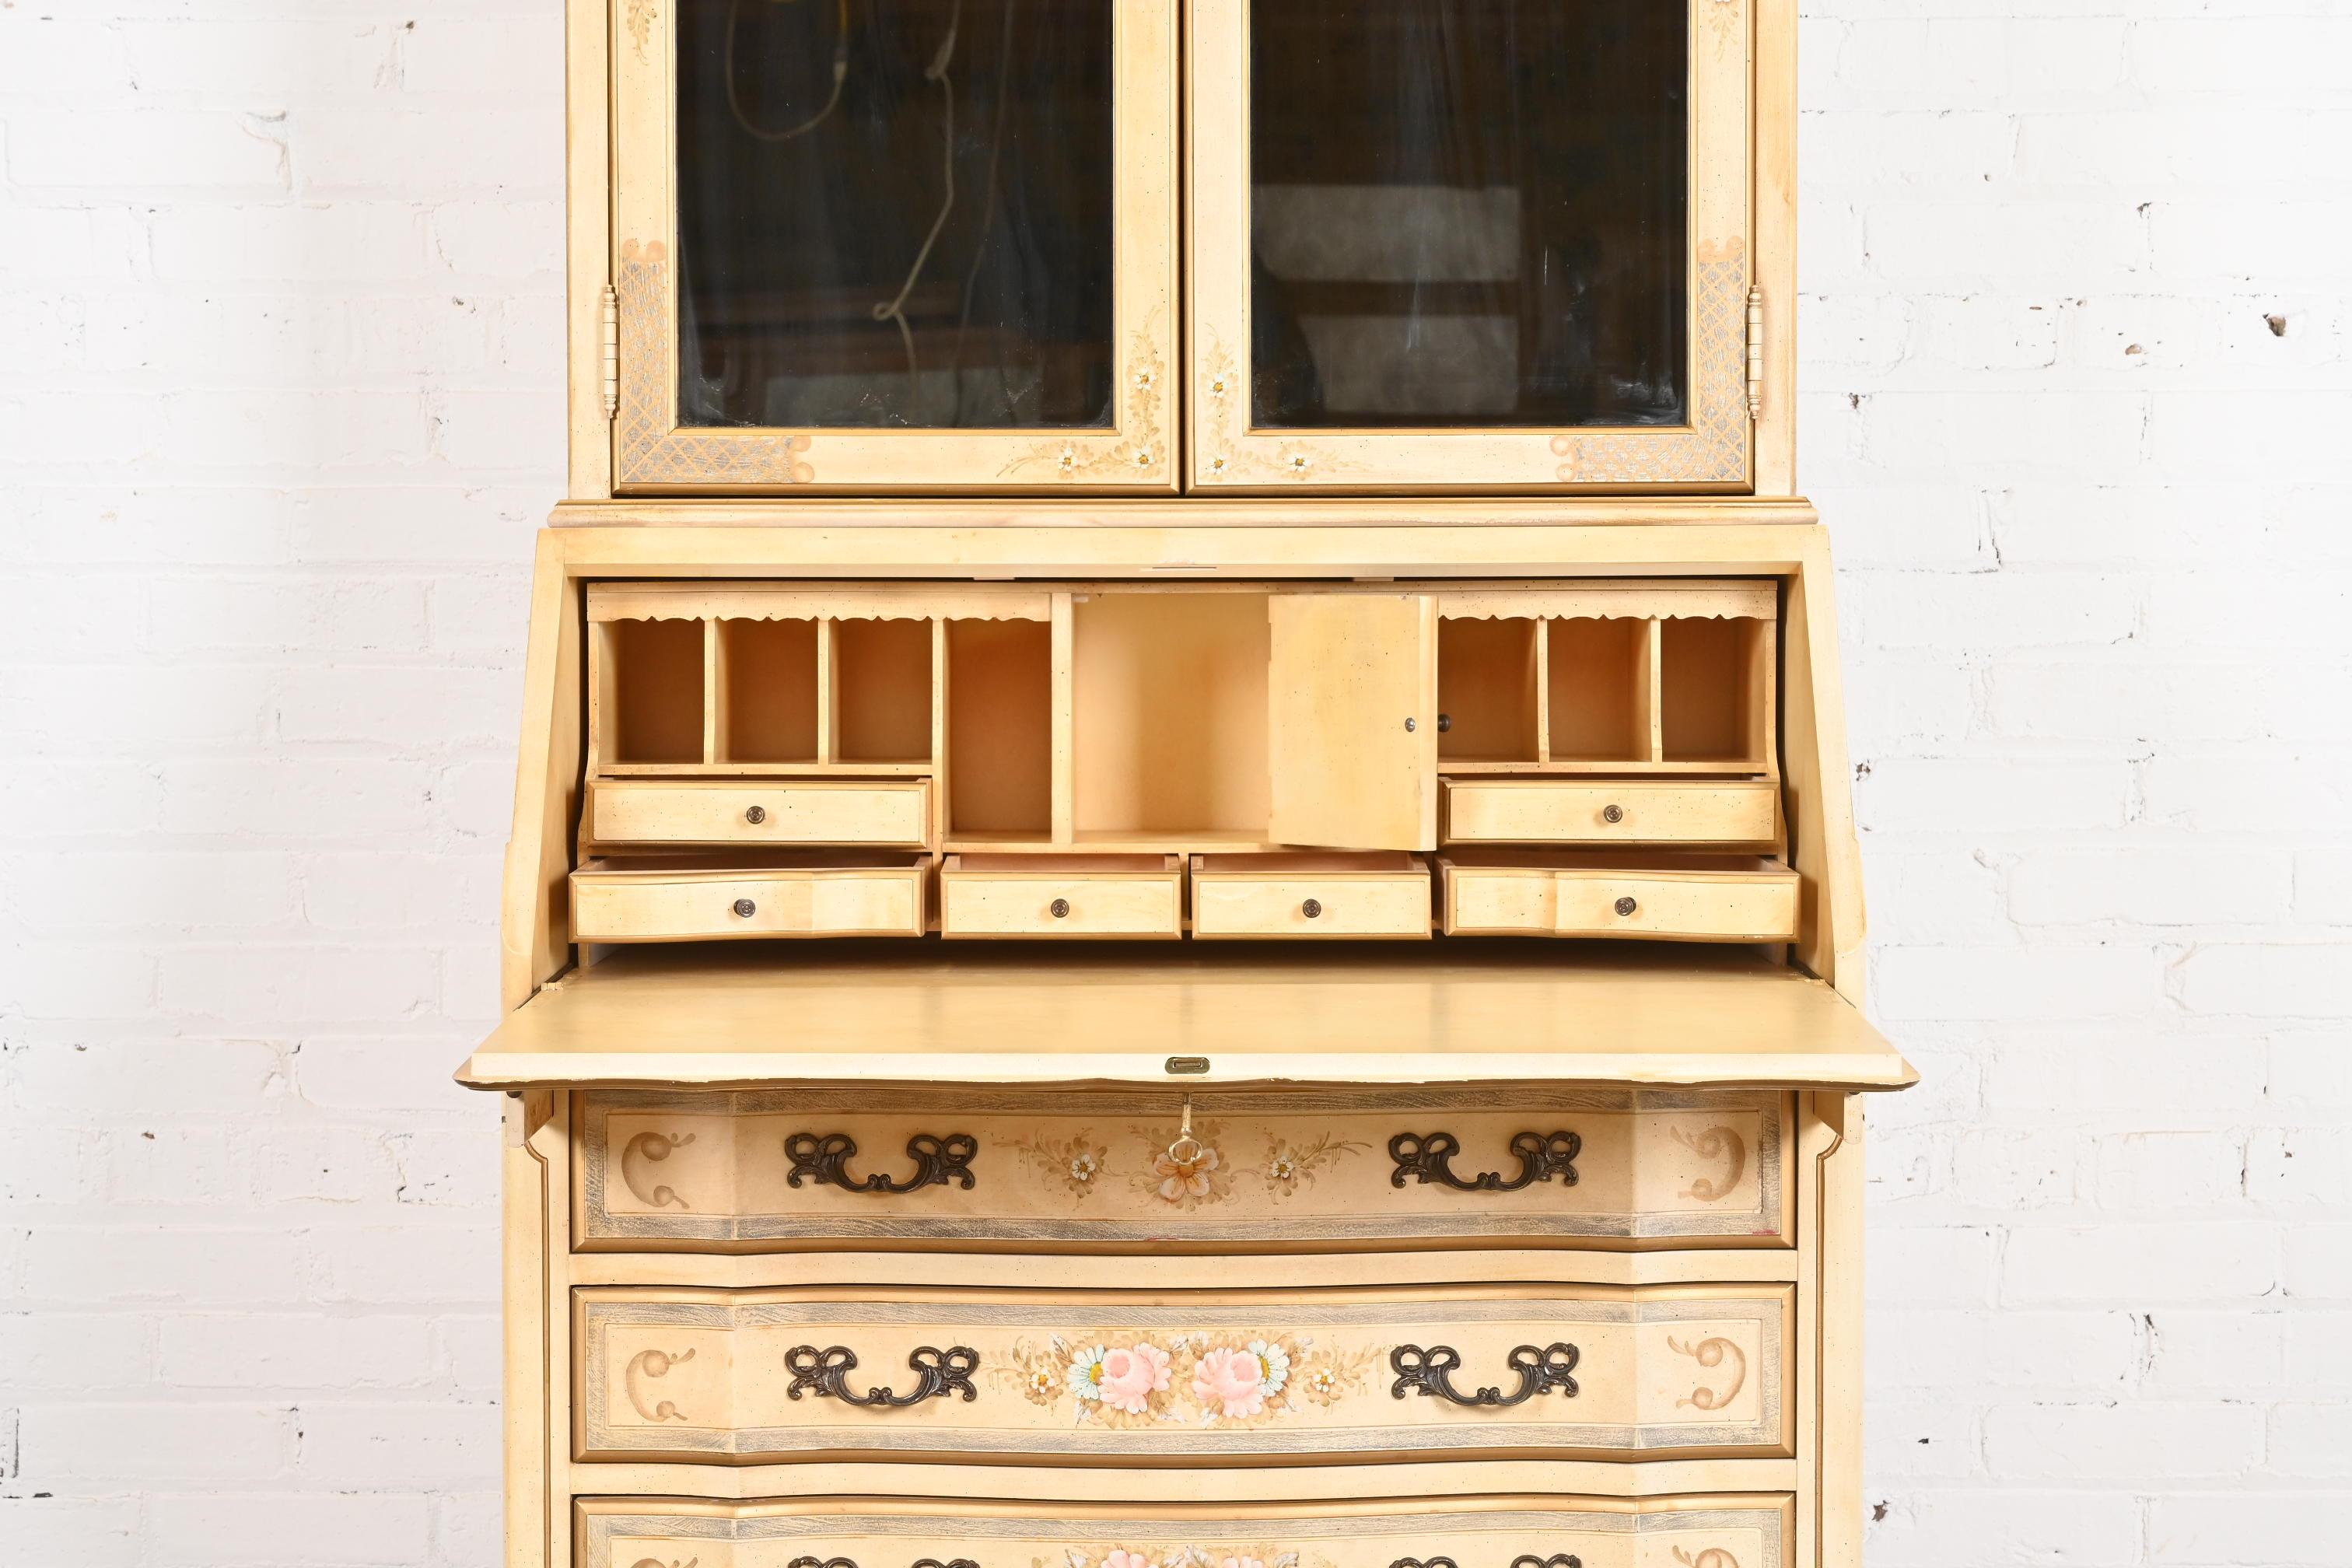 Brass Maddox French Provincial Louis XV Painted Secretary Desk With Mirrored Bookcase For Sale